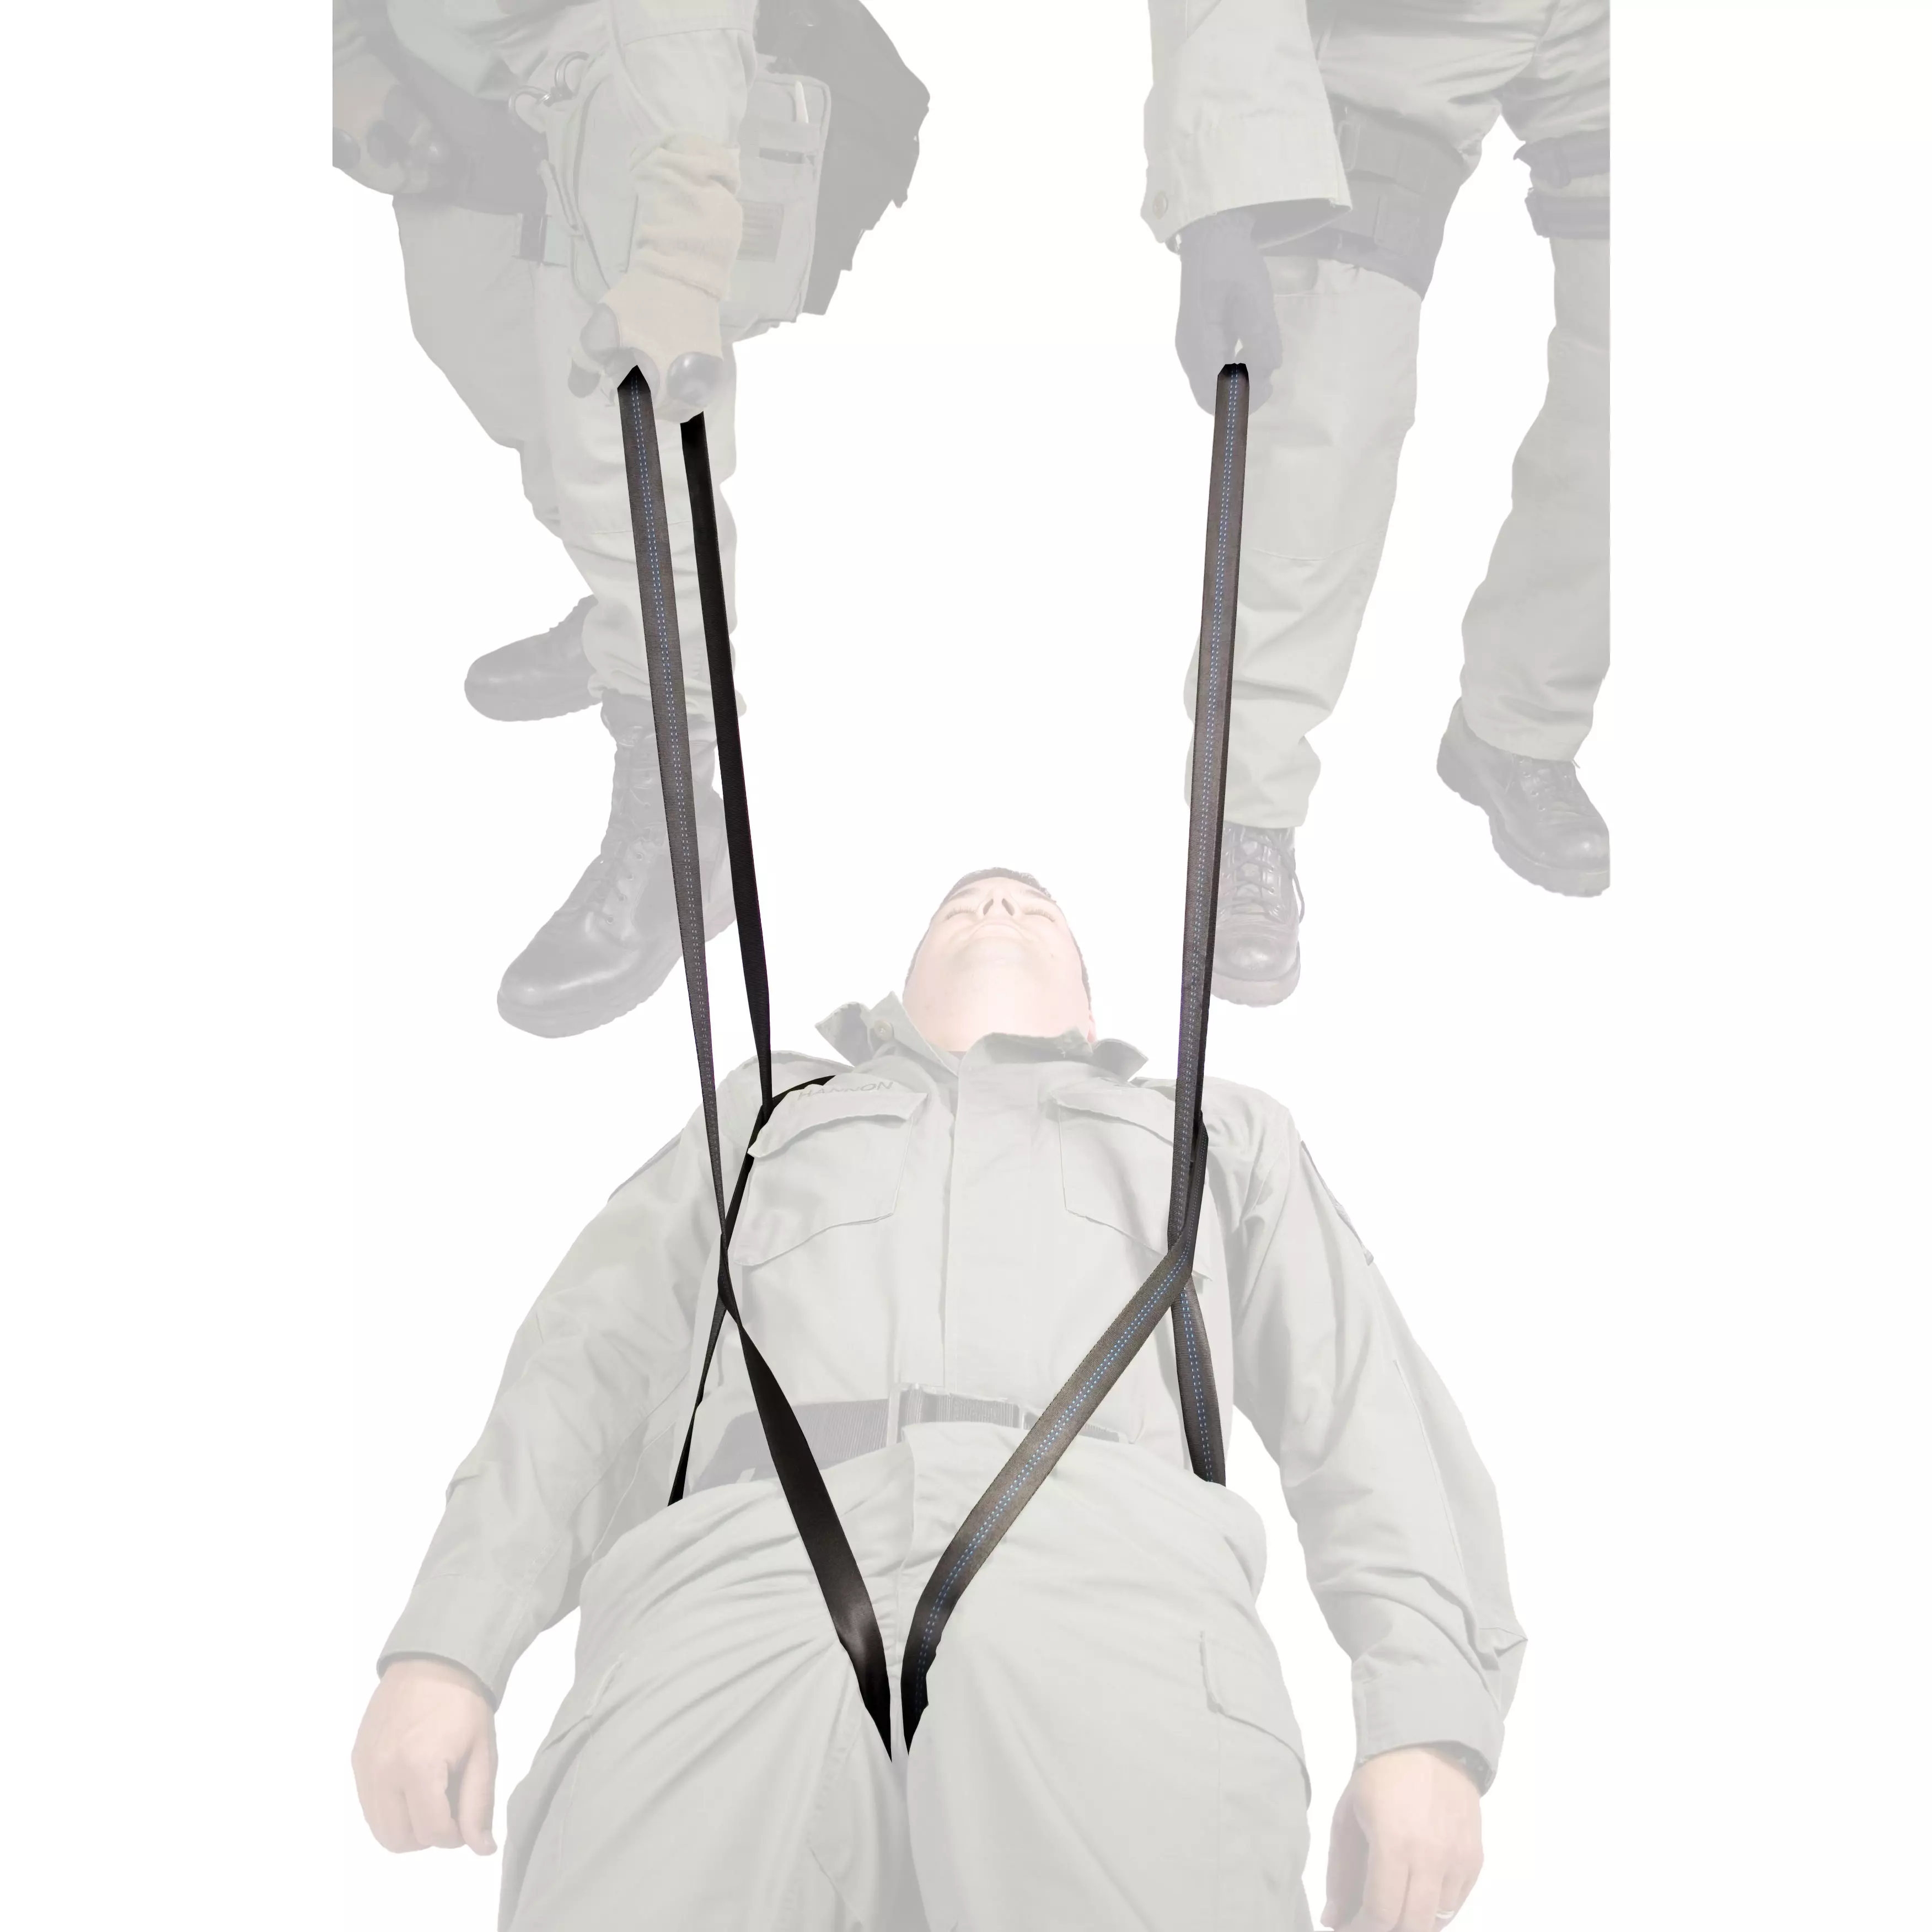 NAR Hasty Harness rescue harness / webbing sling